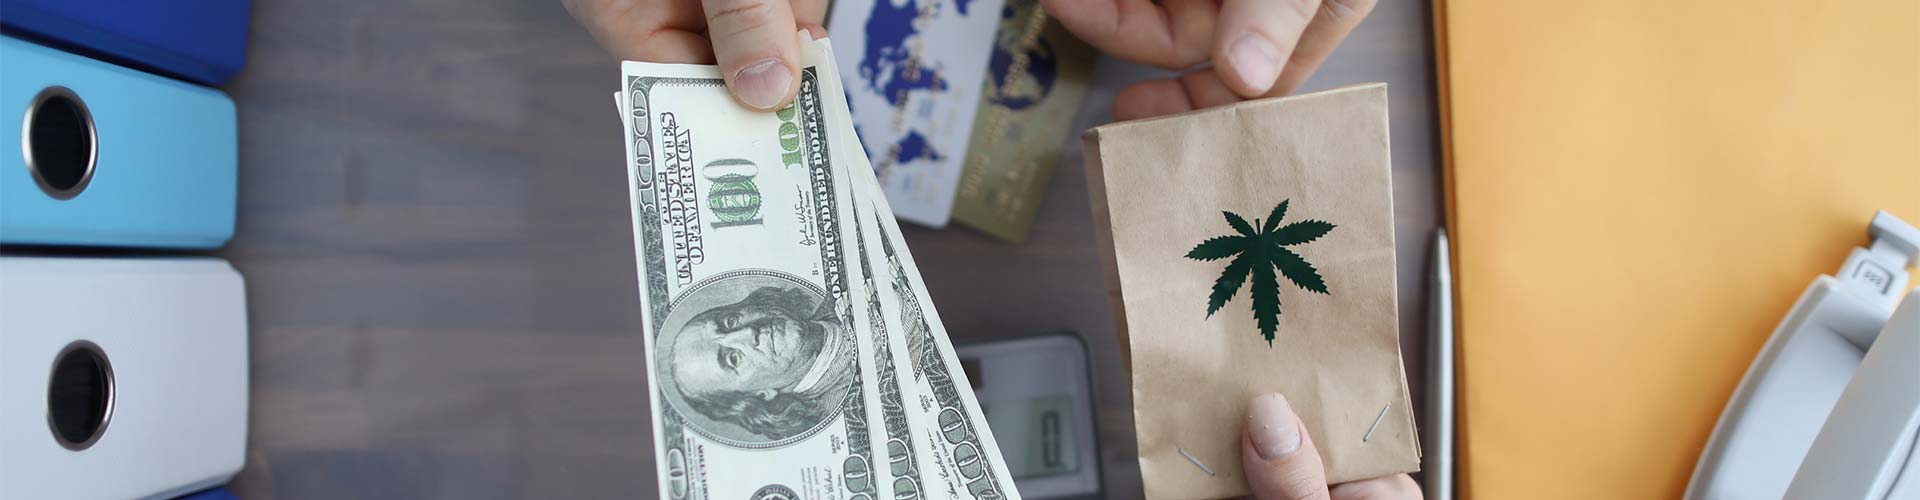 CBD And Hemp Merchant Account Payment Solutions And Credit Card Processing - Website Payment Pro | Website Payment Pro